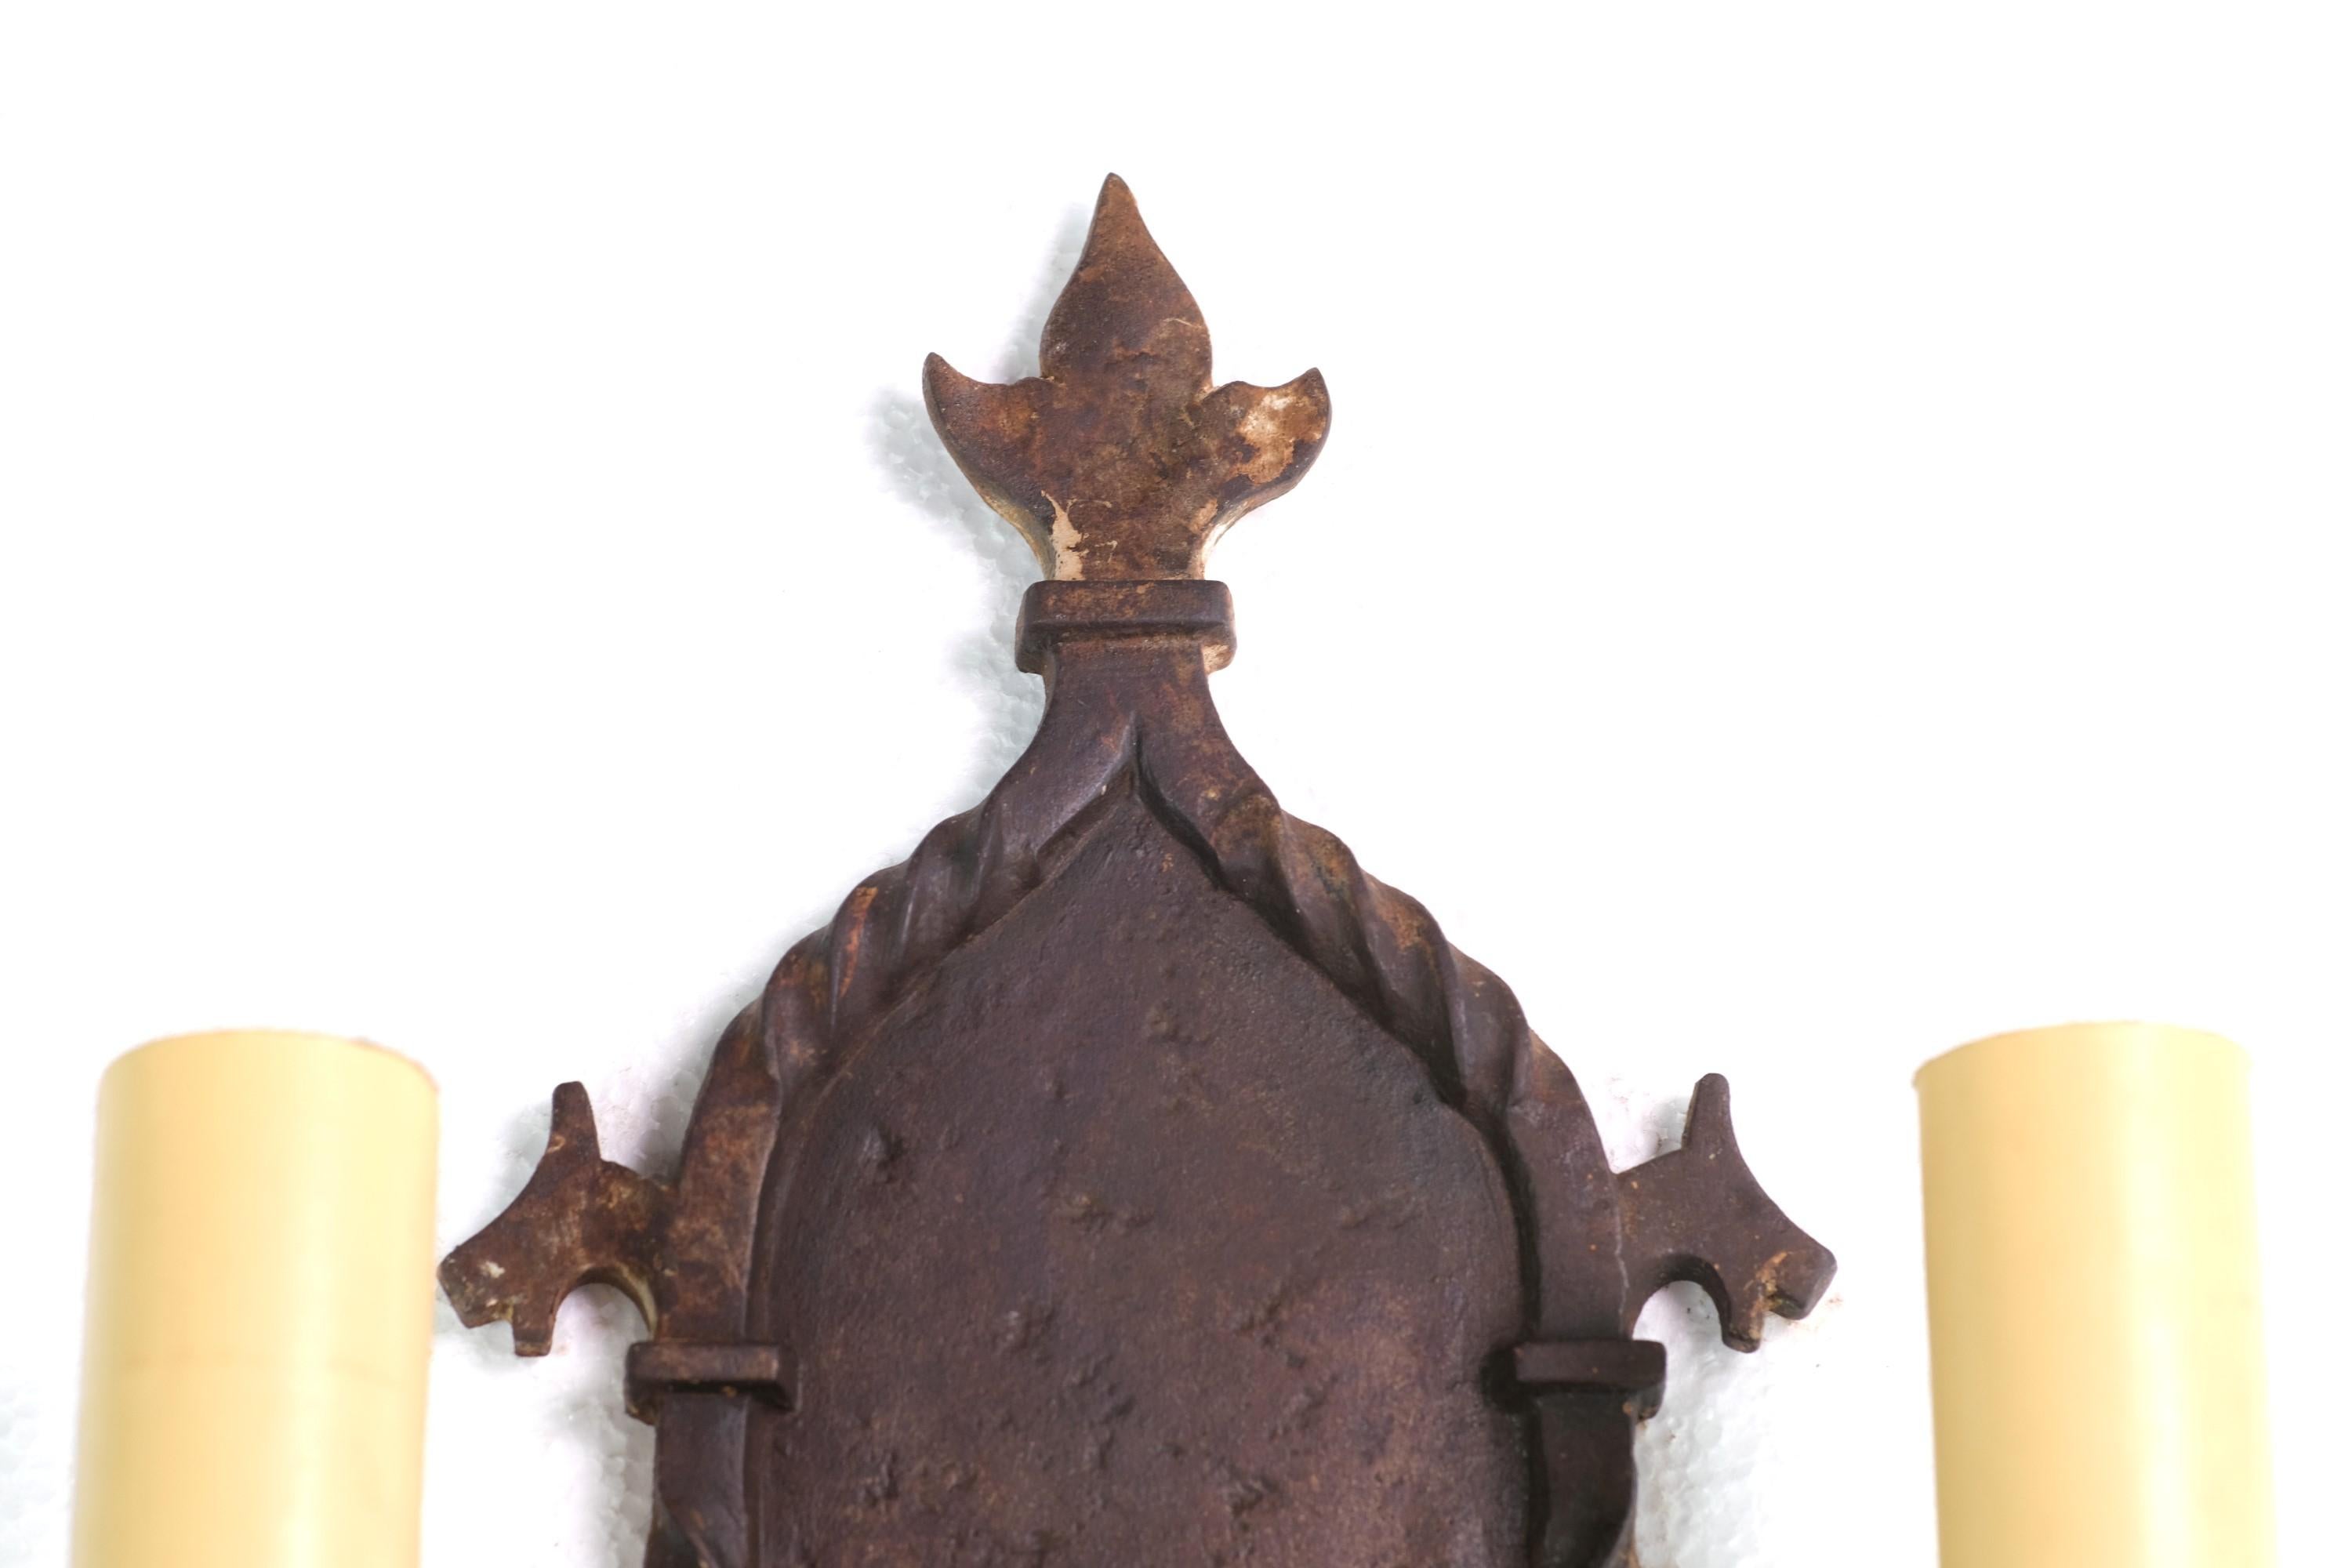 Early 20th century hand hammered Arts & Crafts sconce. Made from wrought and cast iron, this sconce features two arms and Griffin details. Price includes restoration. Small quantity available at time of posting. Priced each. Please inquire. Please